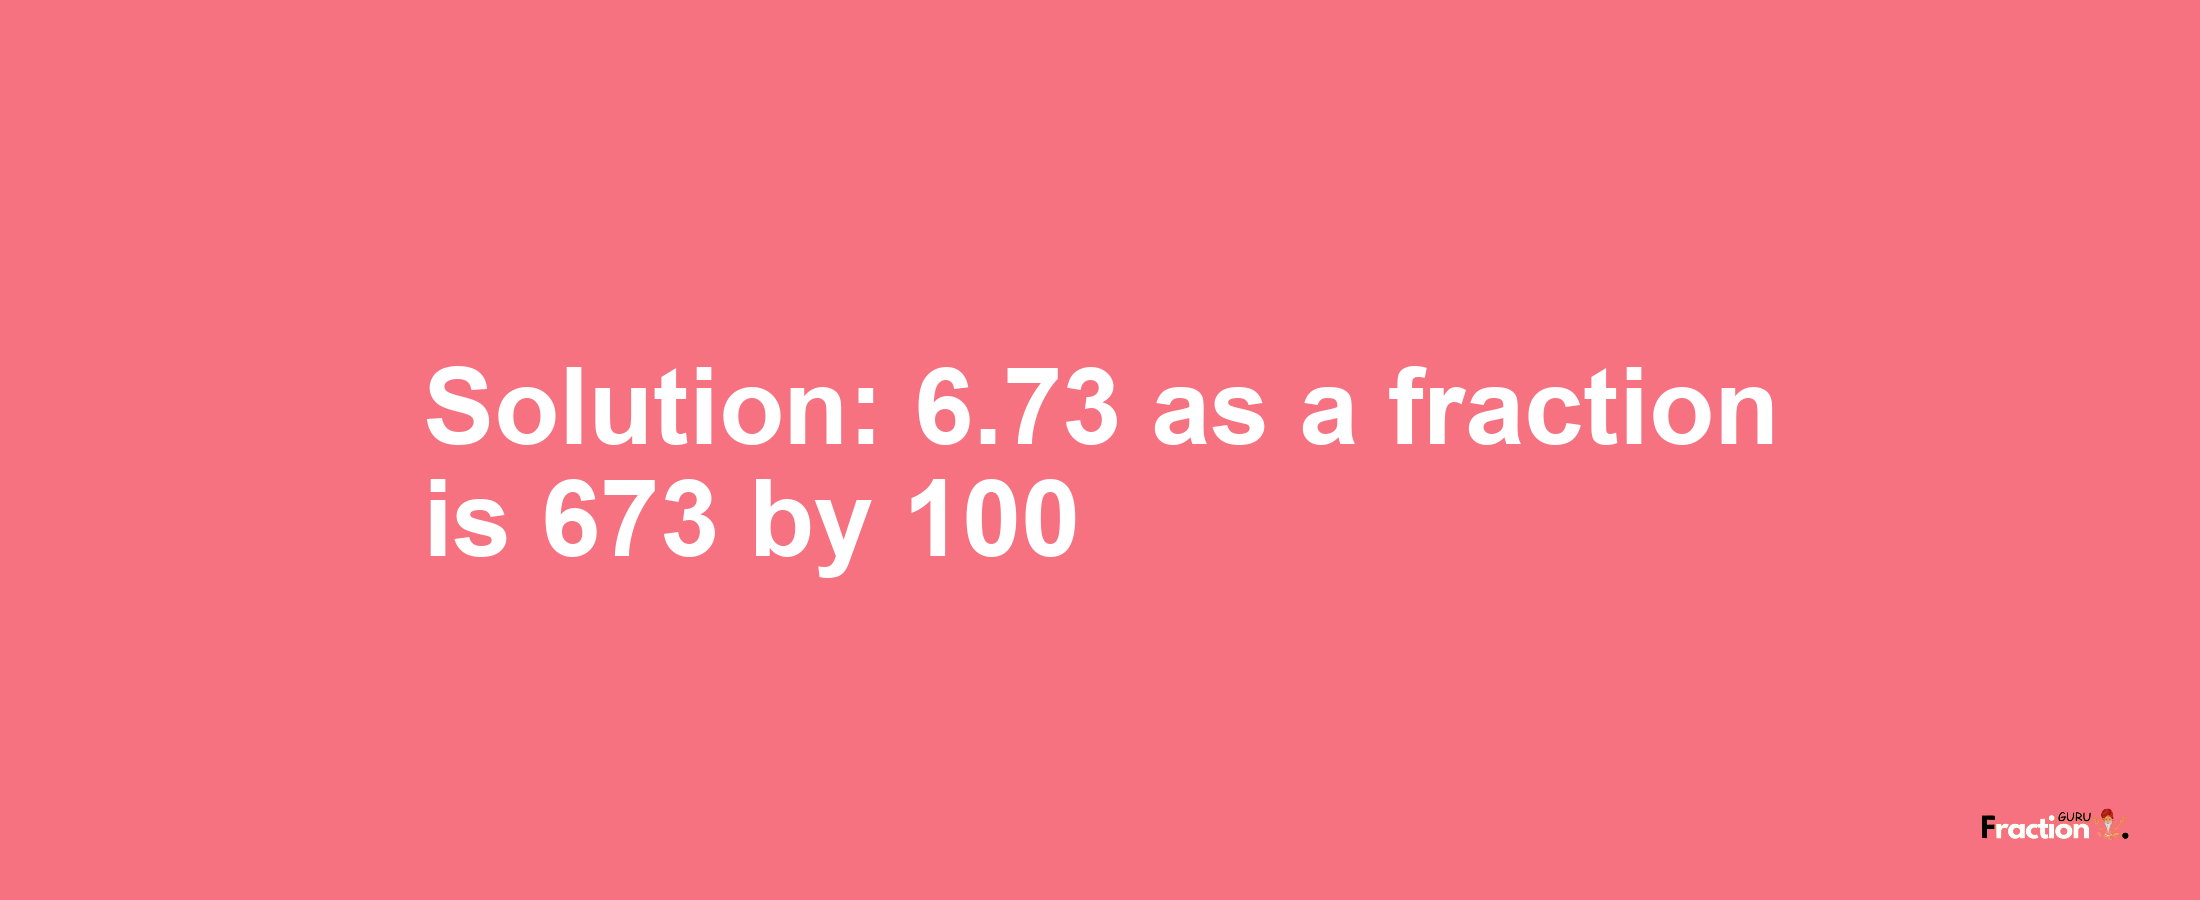 Solution:6.73 as a fraction is 673/100